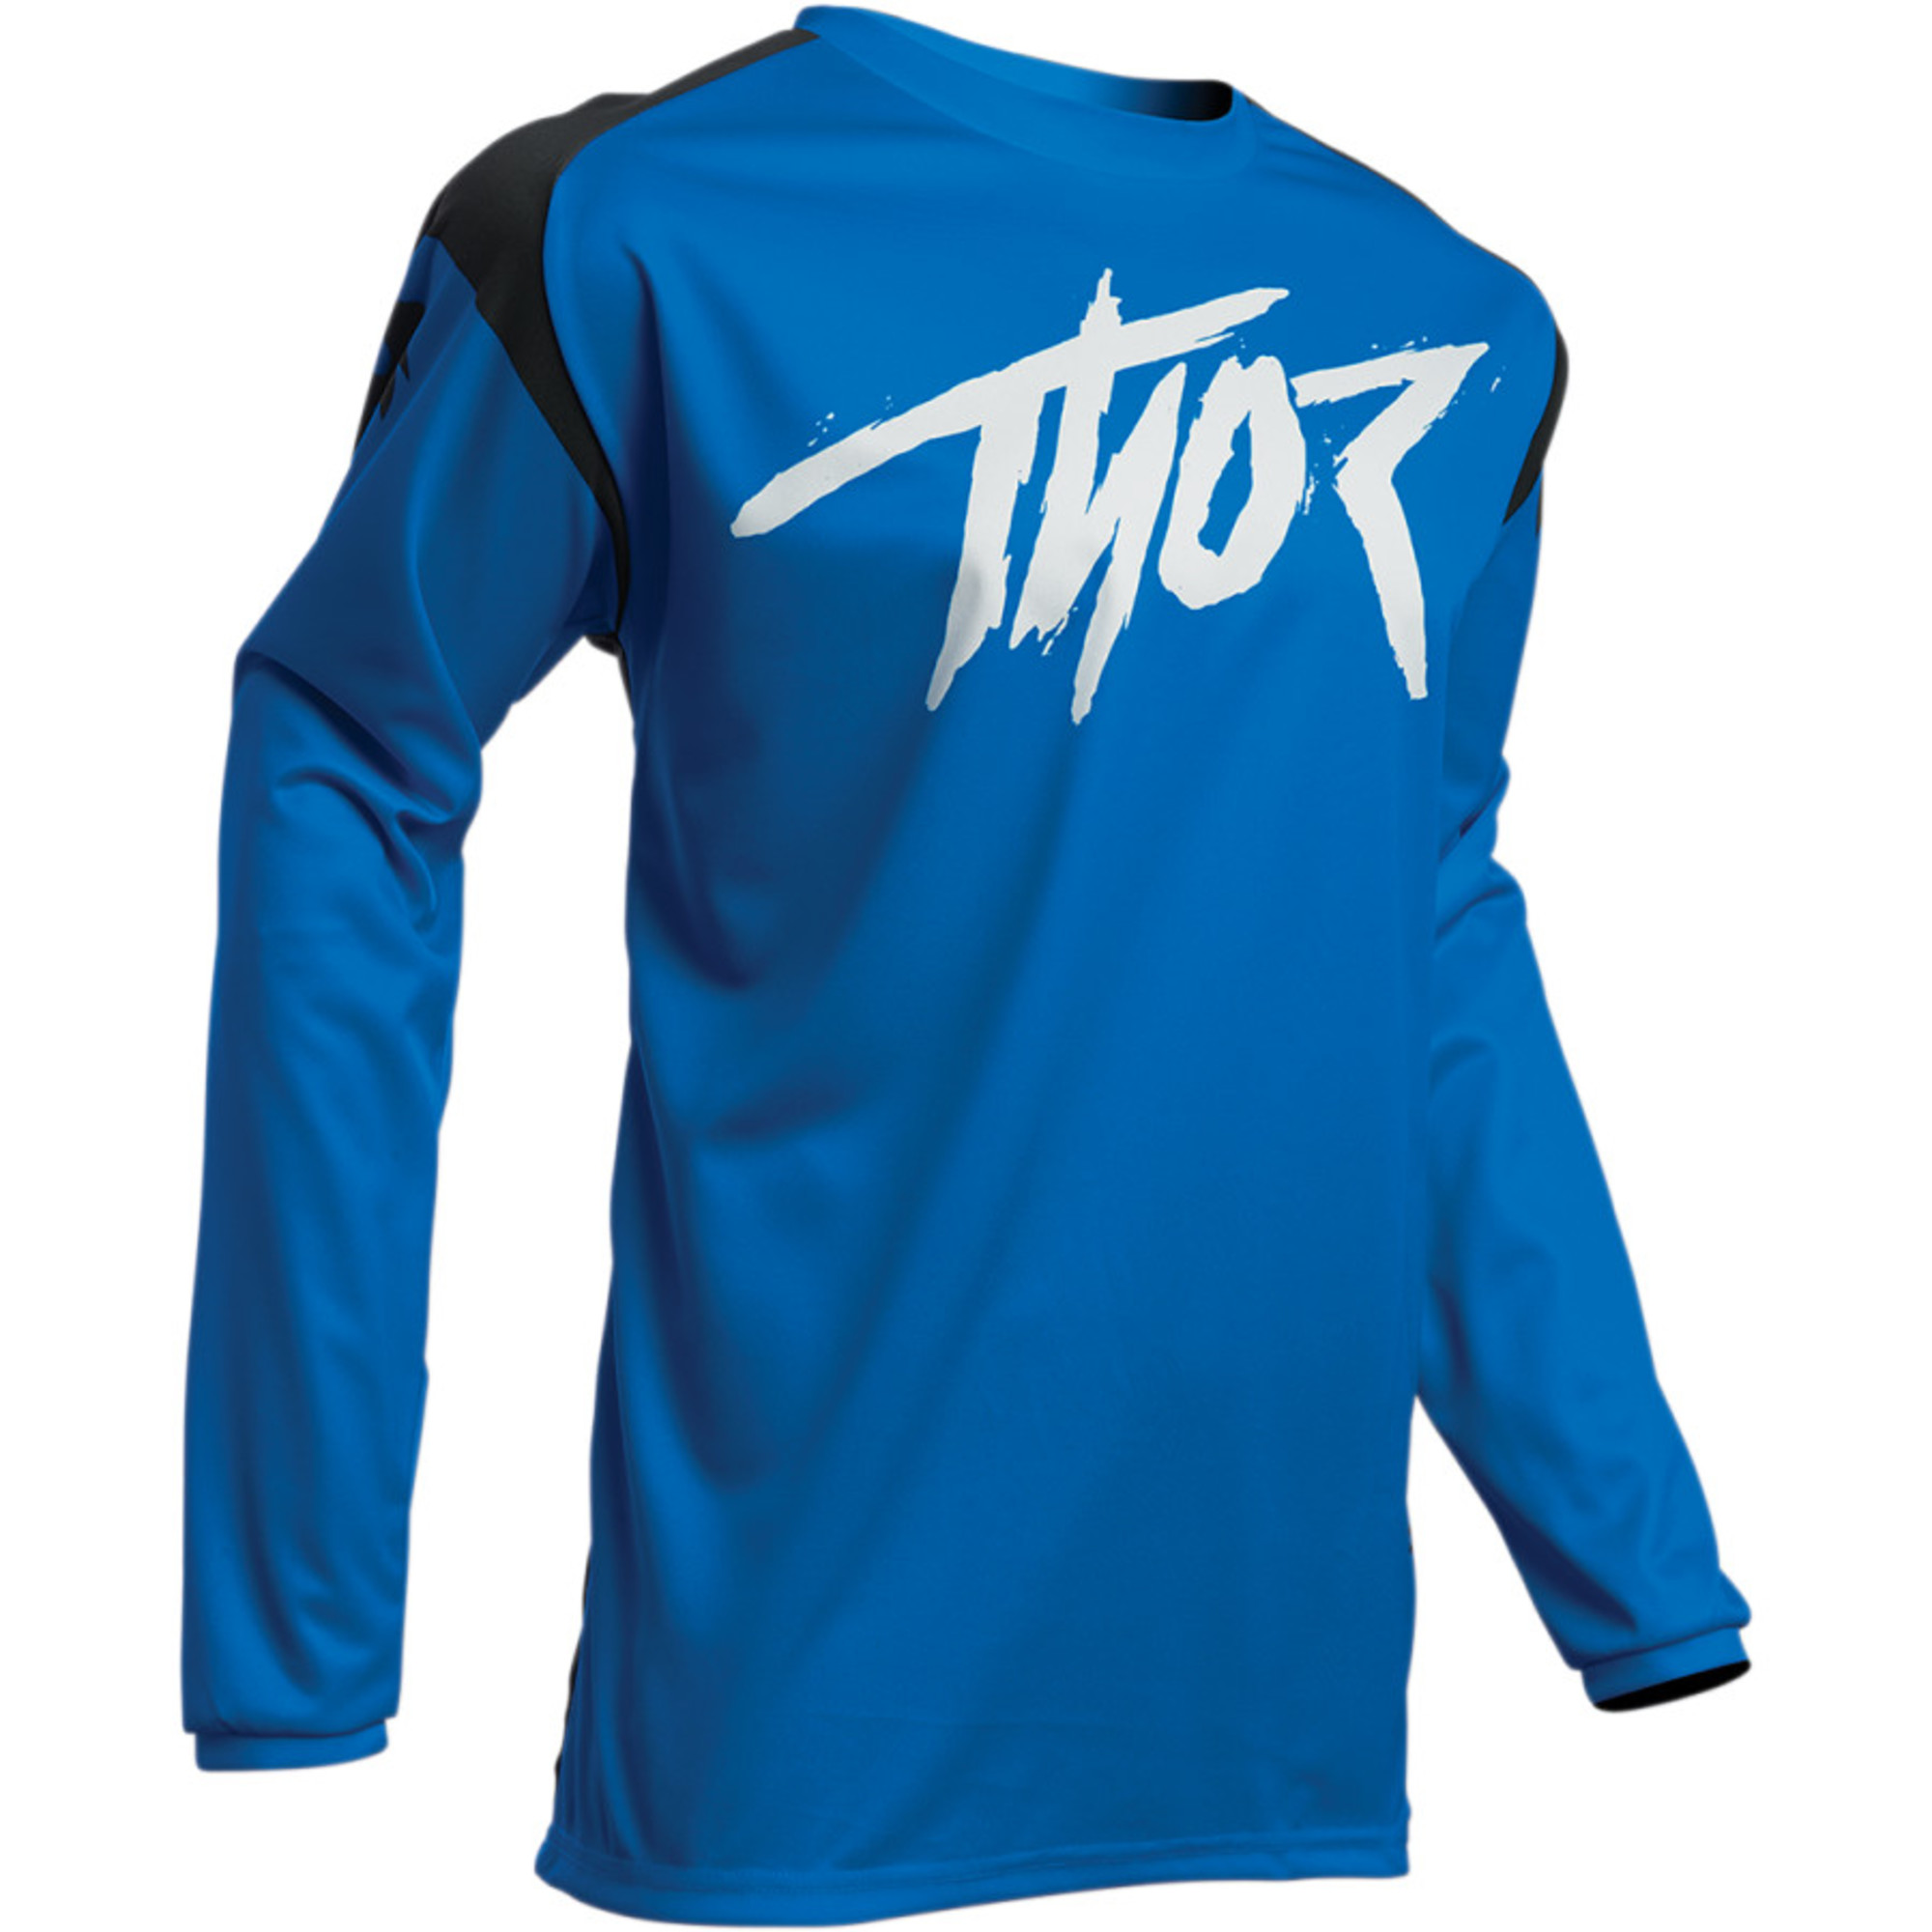 thor jerseys for kids sector link